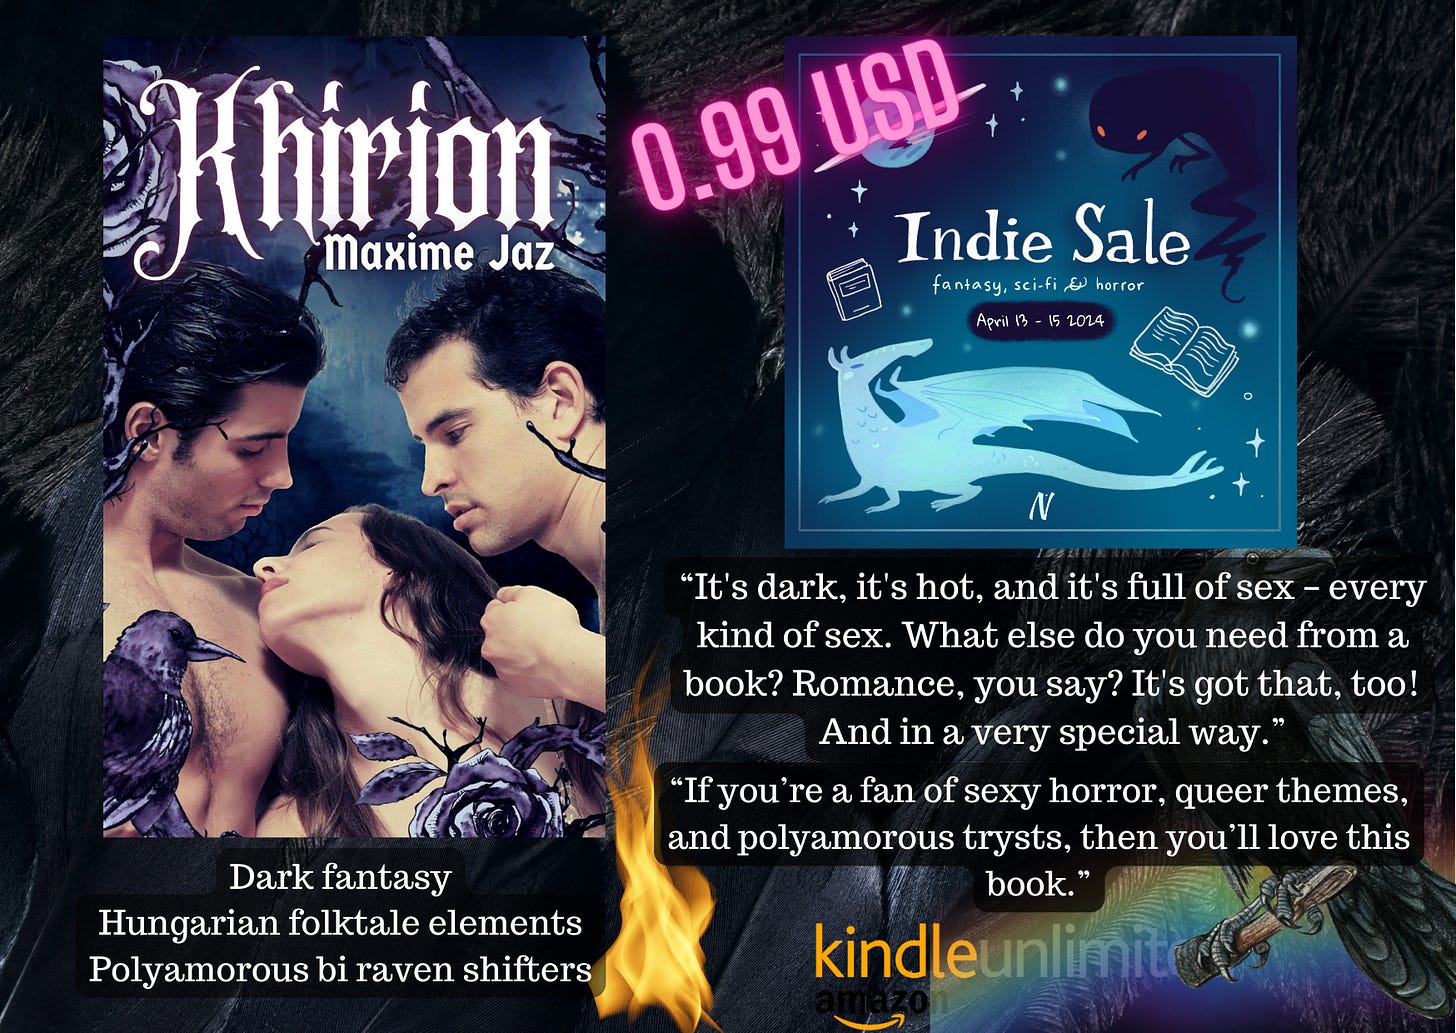 promo board for Khirion at 0.99 during the sale 13 to 15 April. The board also has text Dark fantasy Hungarian folk elements, polyamorous bi raven shifters It's dark, hot and it's full of sex, all kinds of sex. What else do you need from a book? Romance you say? It has that to and in a very special way. If you're a fan of sexy horror, queer themes, and polyamorous trysts, then you'll love this book. KU logo